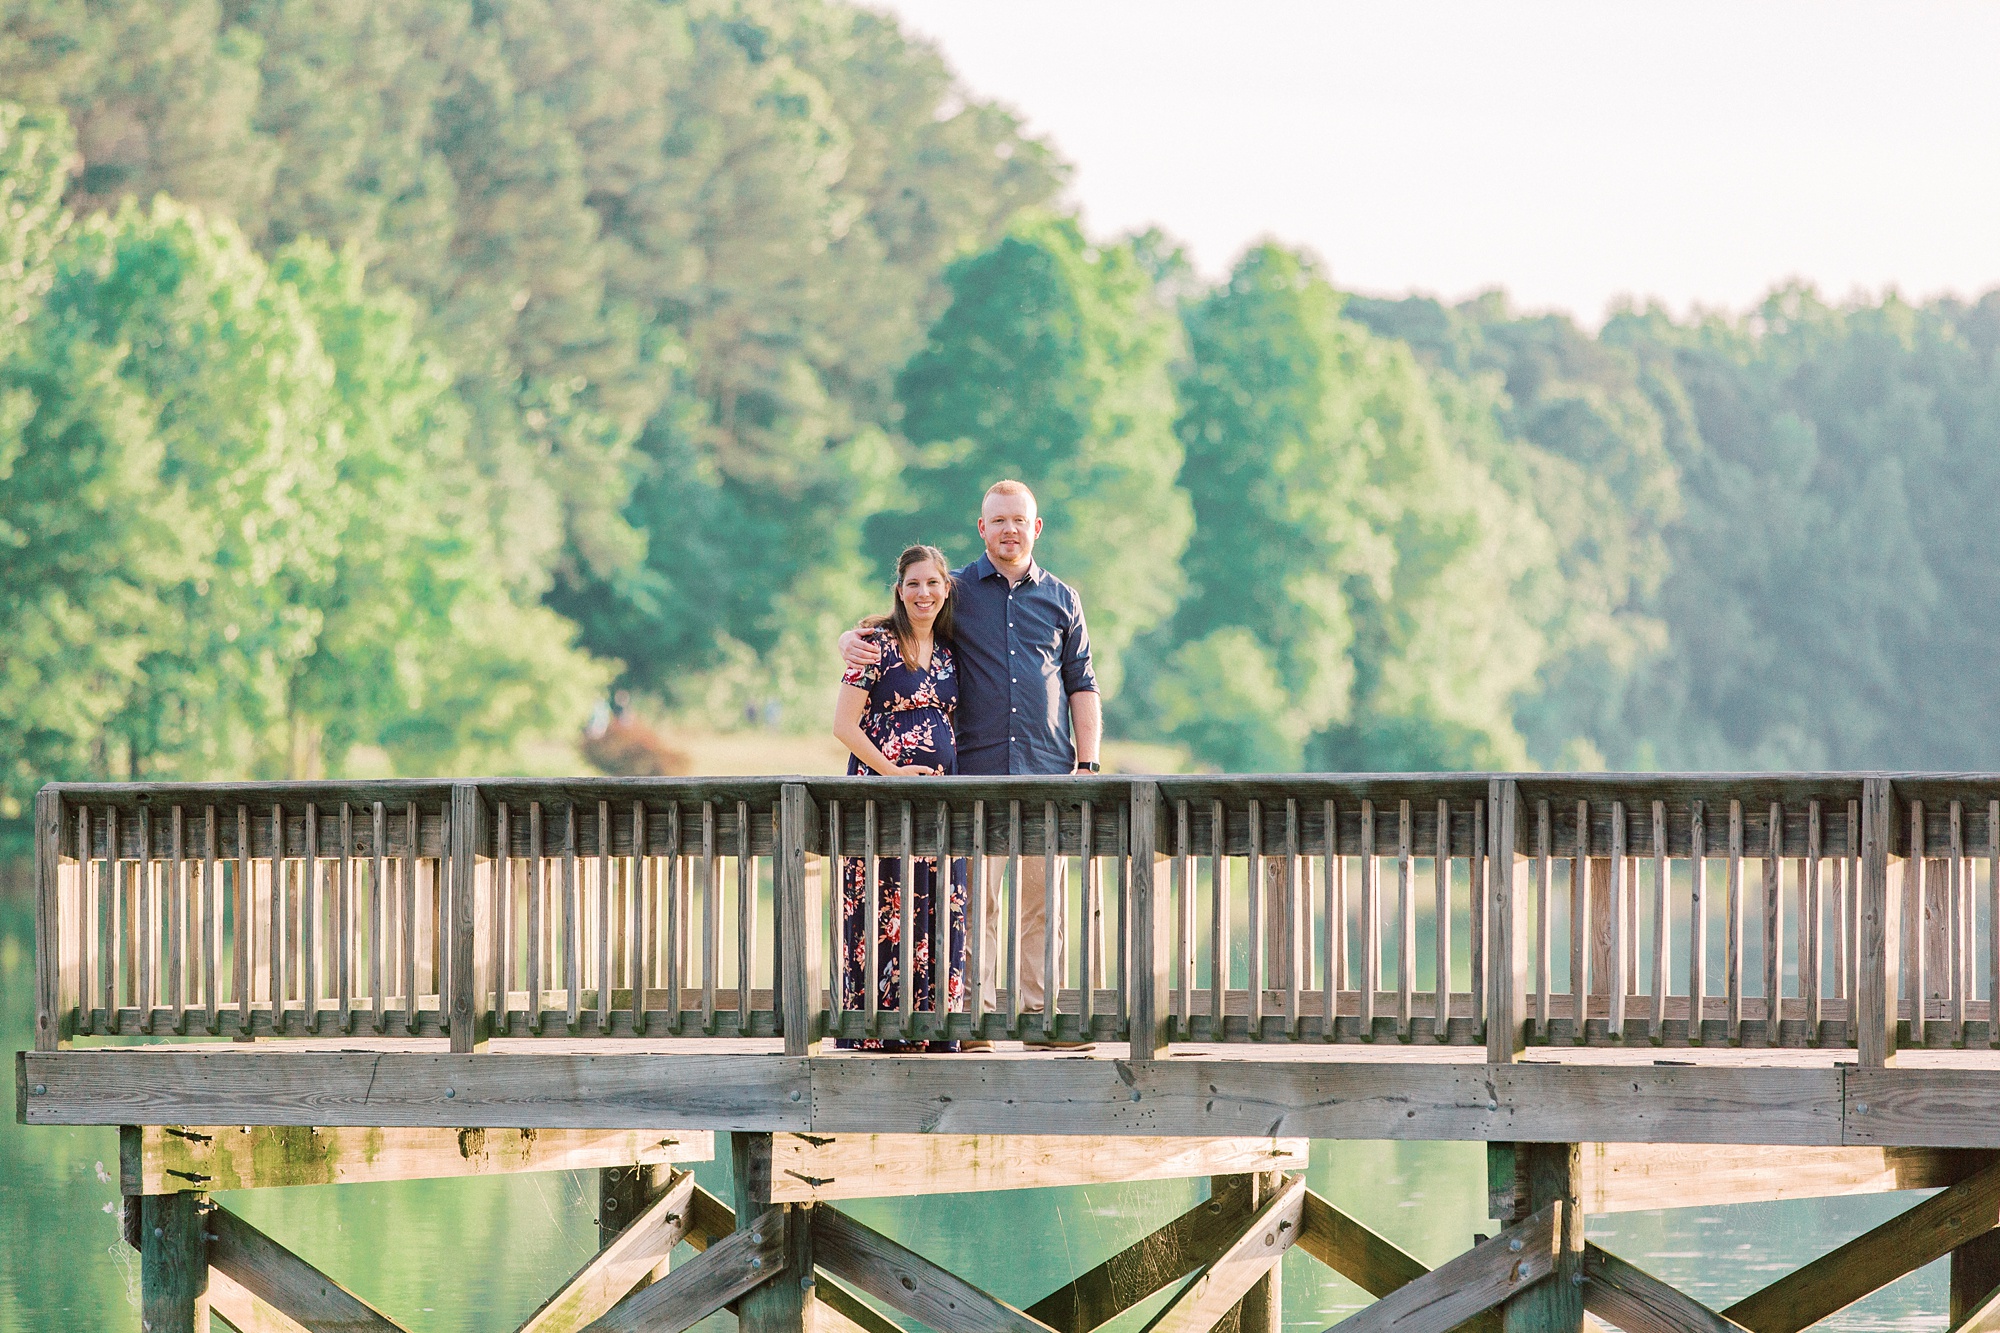 couple poses on wooden pier over water